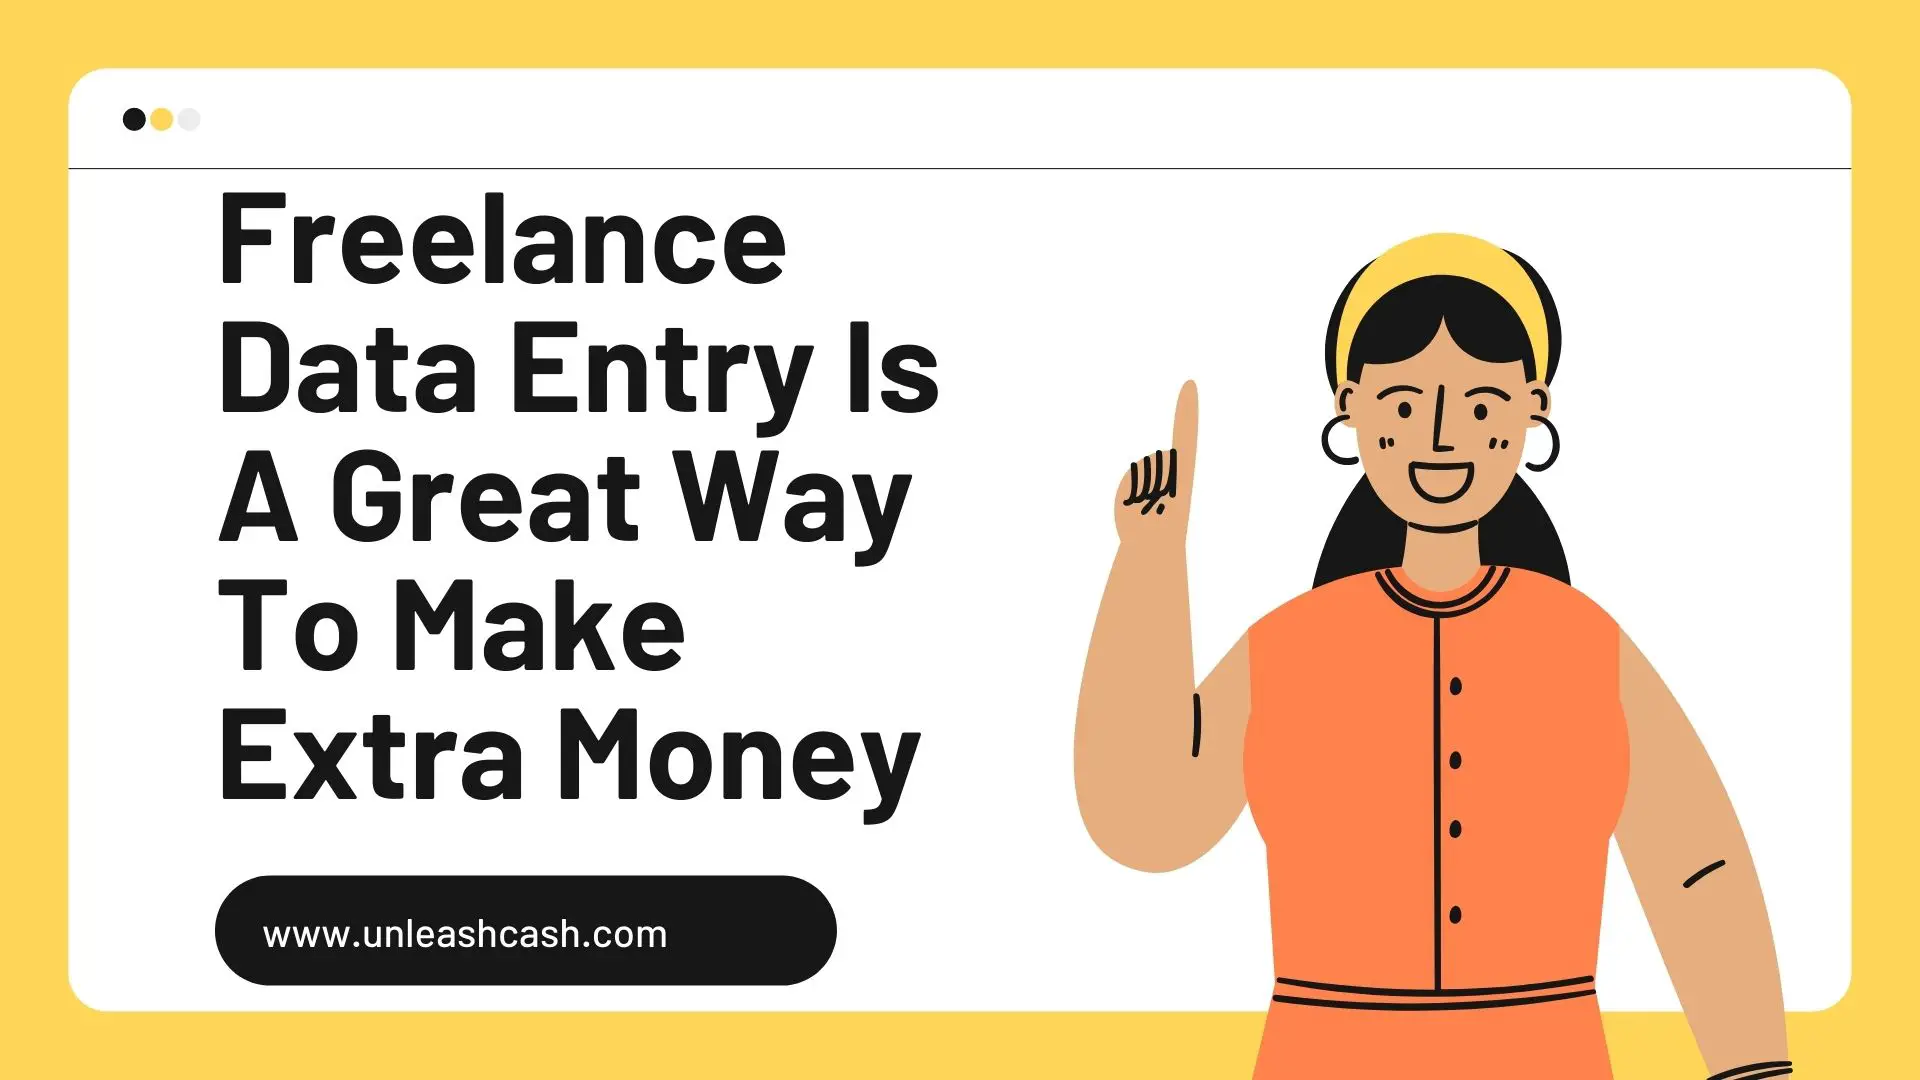 Freelance Data Entry Is A Great Way To Make Extra Money